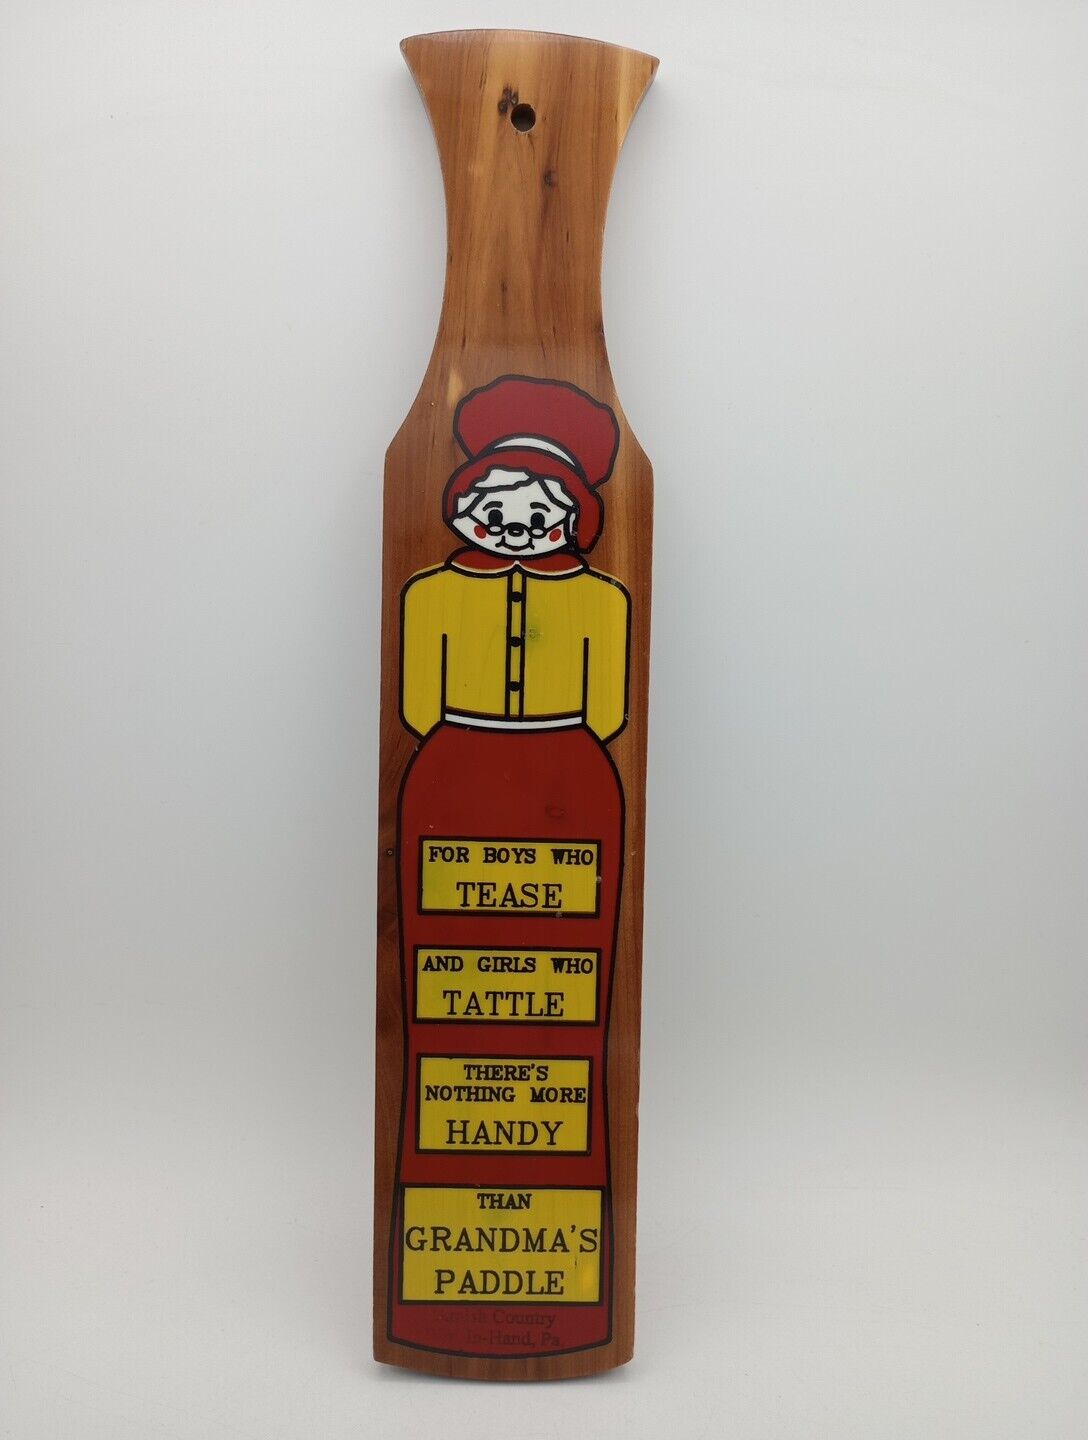 Grandma’s Paddle Naughty Discipline Wooden Amish Country Motel Bird In Hand PA 